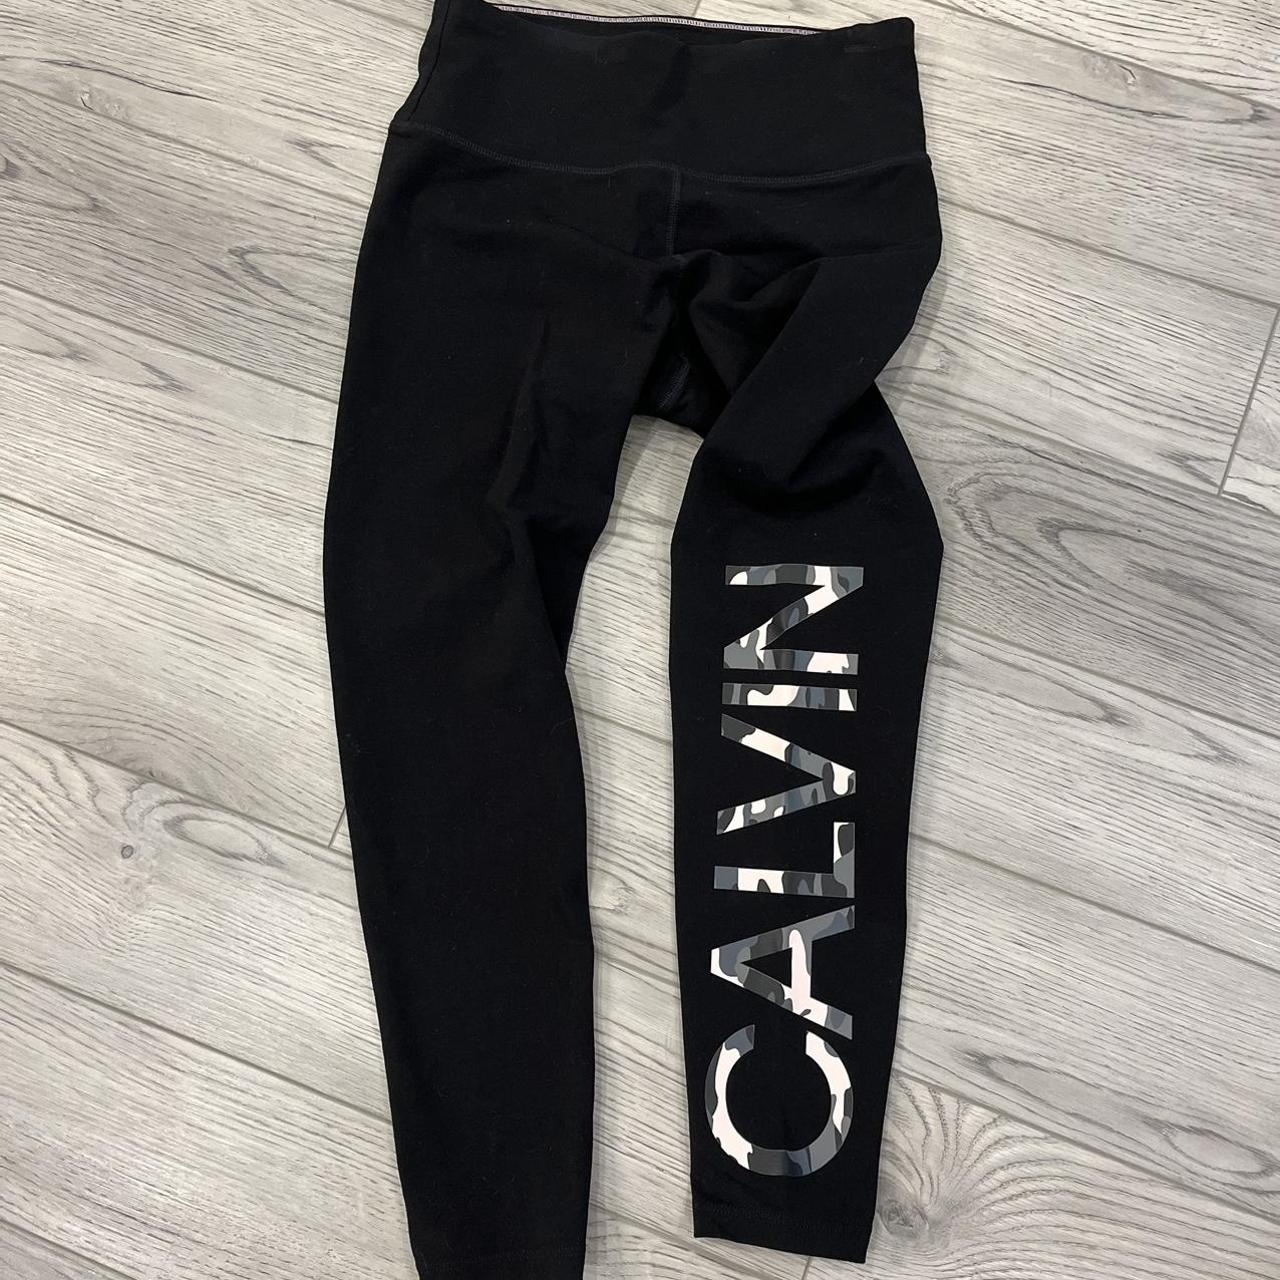 Calvin Klein | Soft Touch Thermal Tights | Black | SportsDirect.com